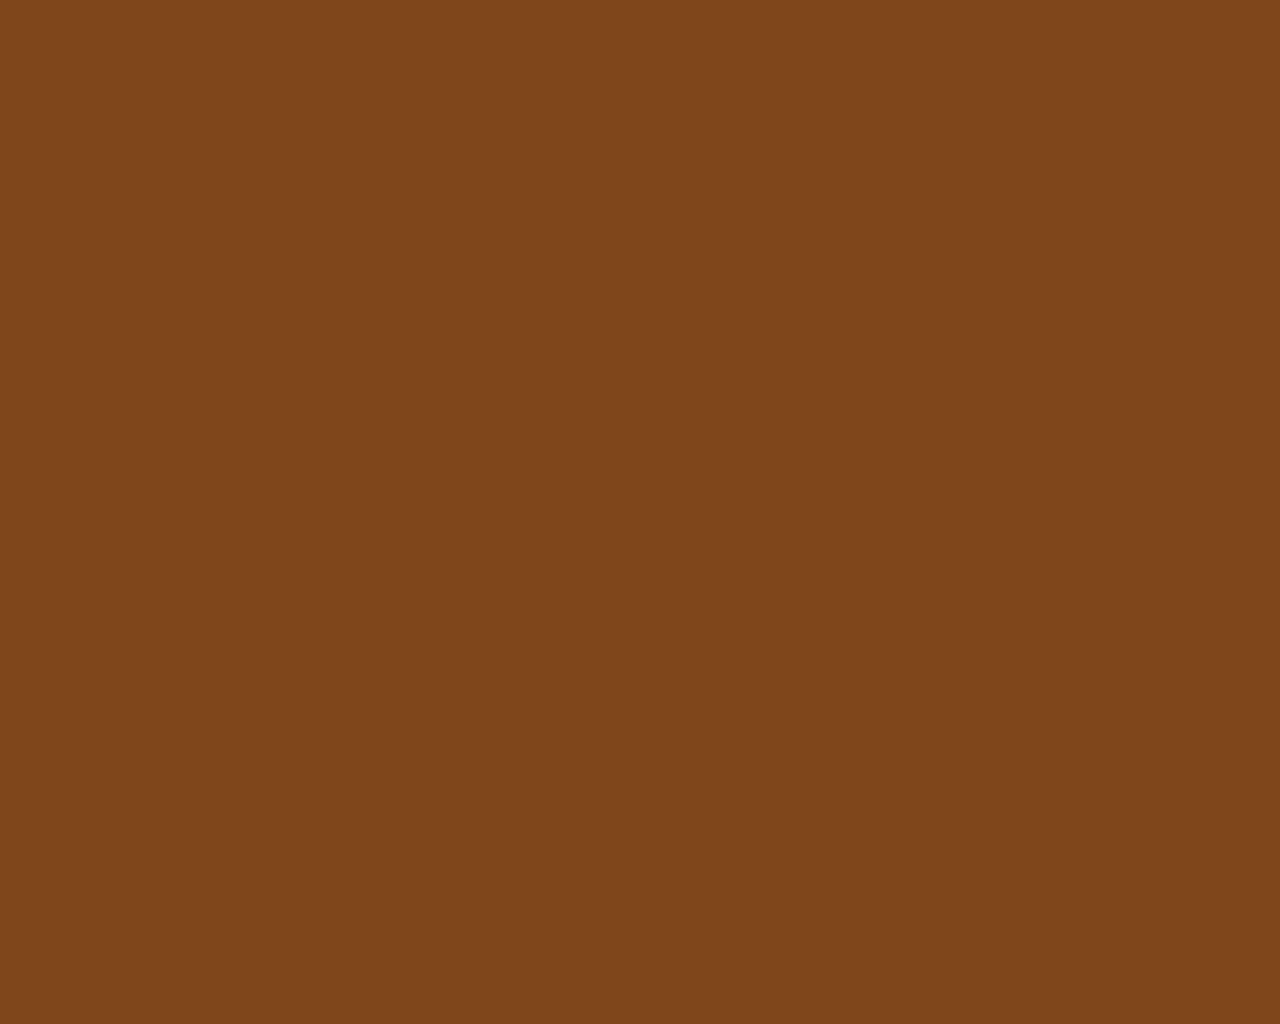 1280x1024 Russet Solid Color Background